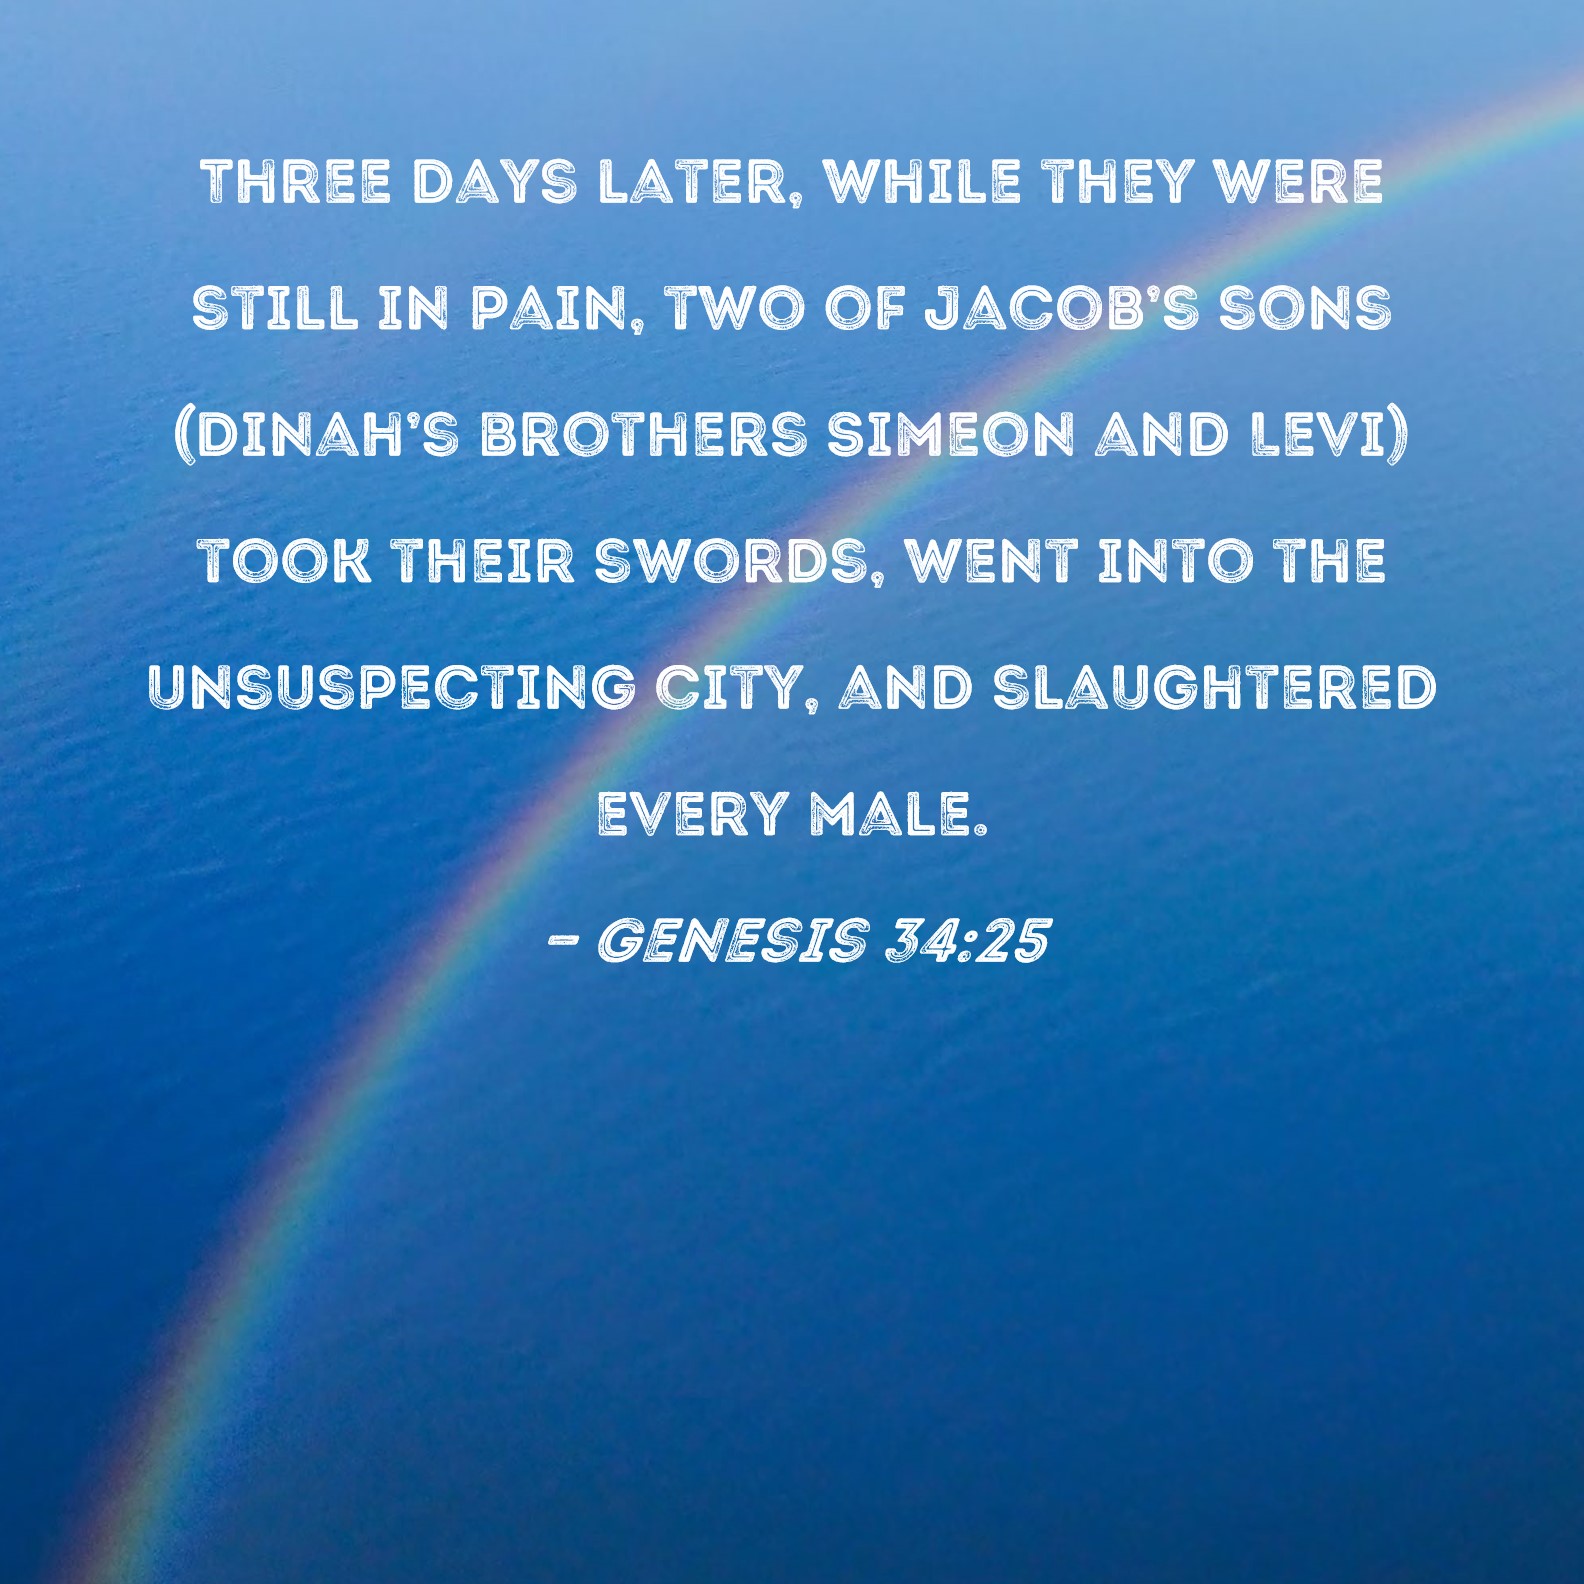 Genesis 34:25 Three days later, while they were still in pain, two of Jacob's  sons (Dinah's brothers Simeon and Levi) took their swords, went into the  unsuspecting city, and slaughtered every male.